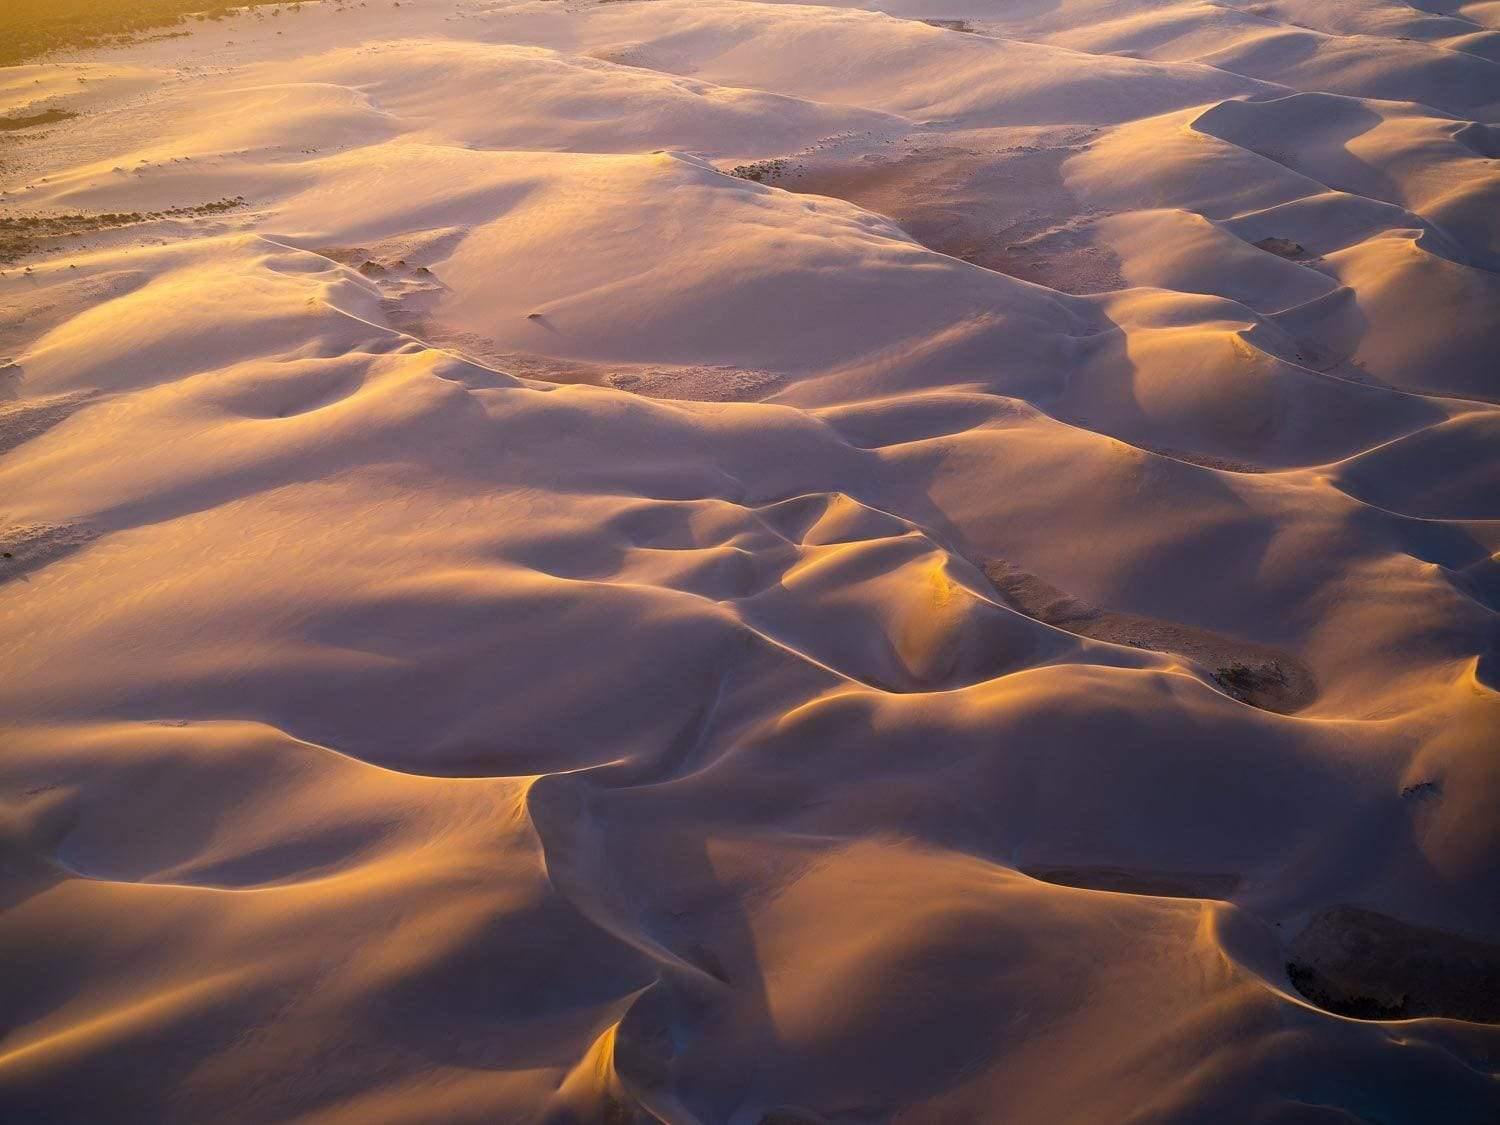 Aerial view of a desert with many waves and small mounds of sand, Golden Sands